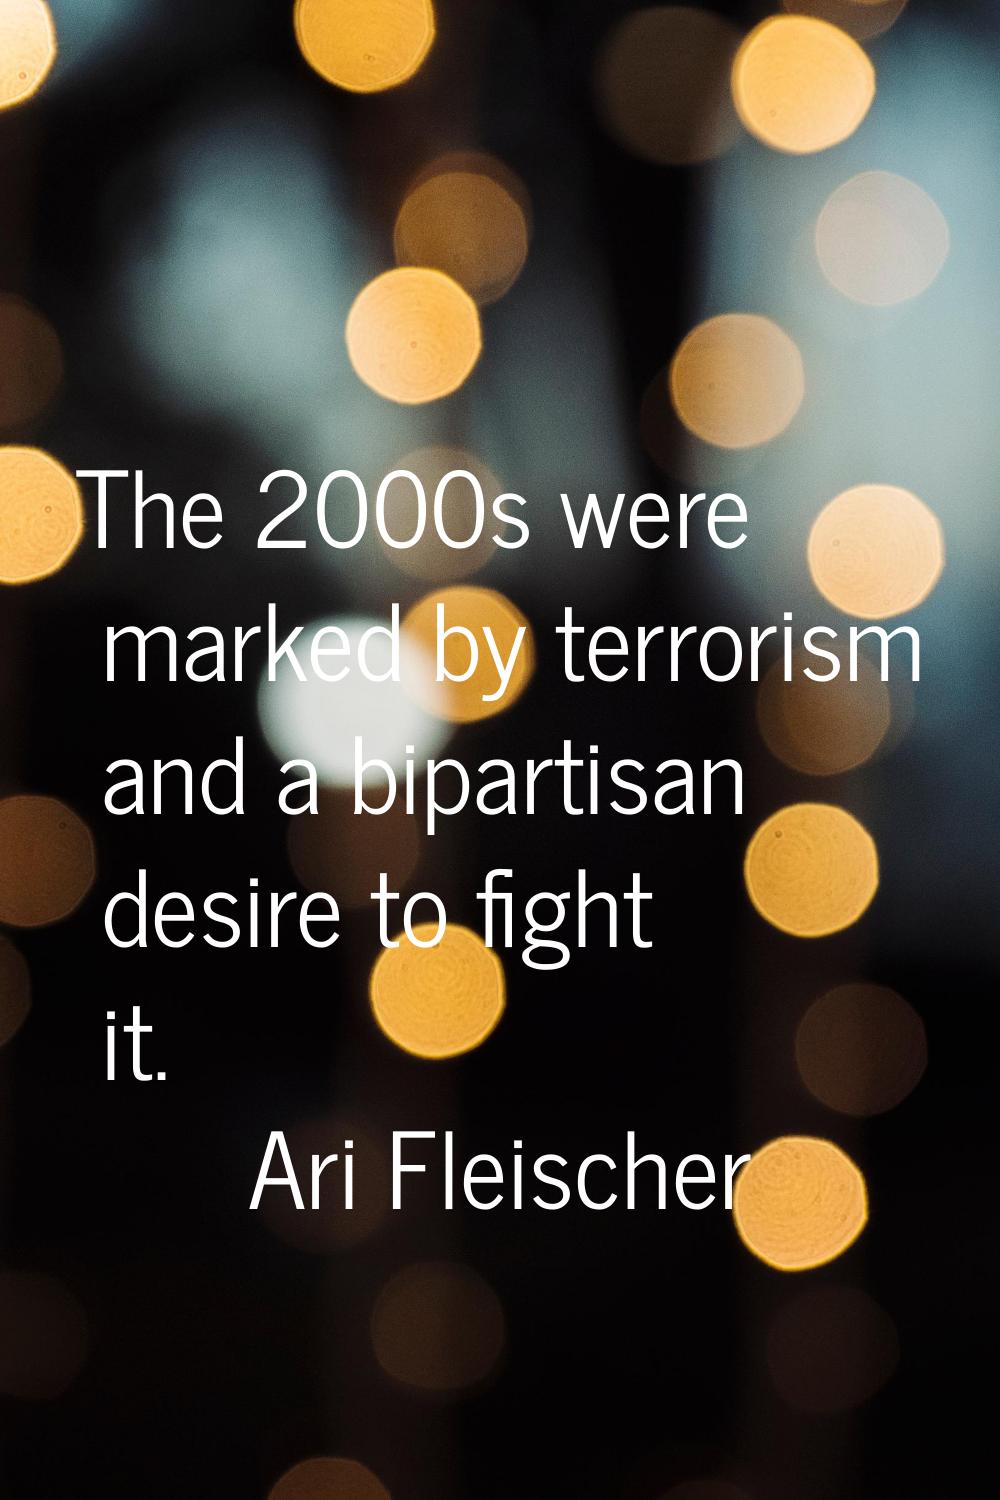 The 2000s were marked by terrorism and a bipartisan desire to fight it.